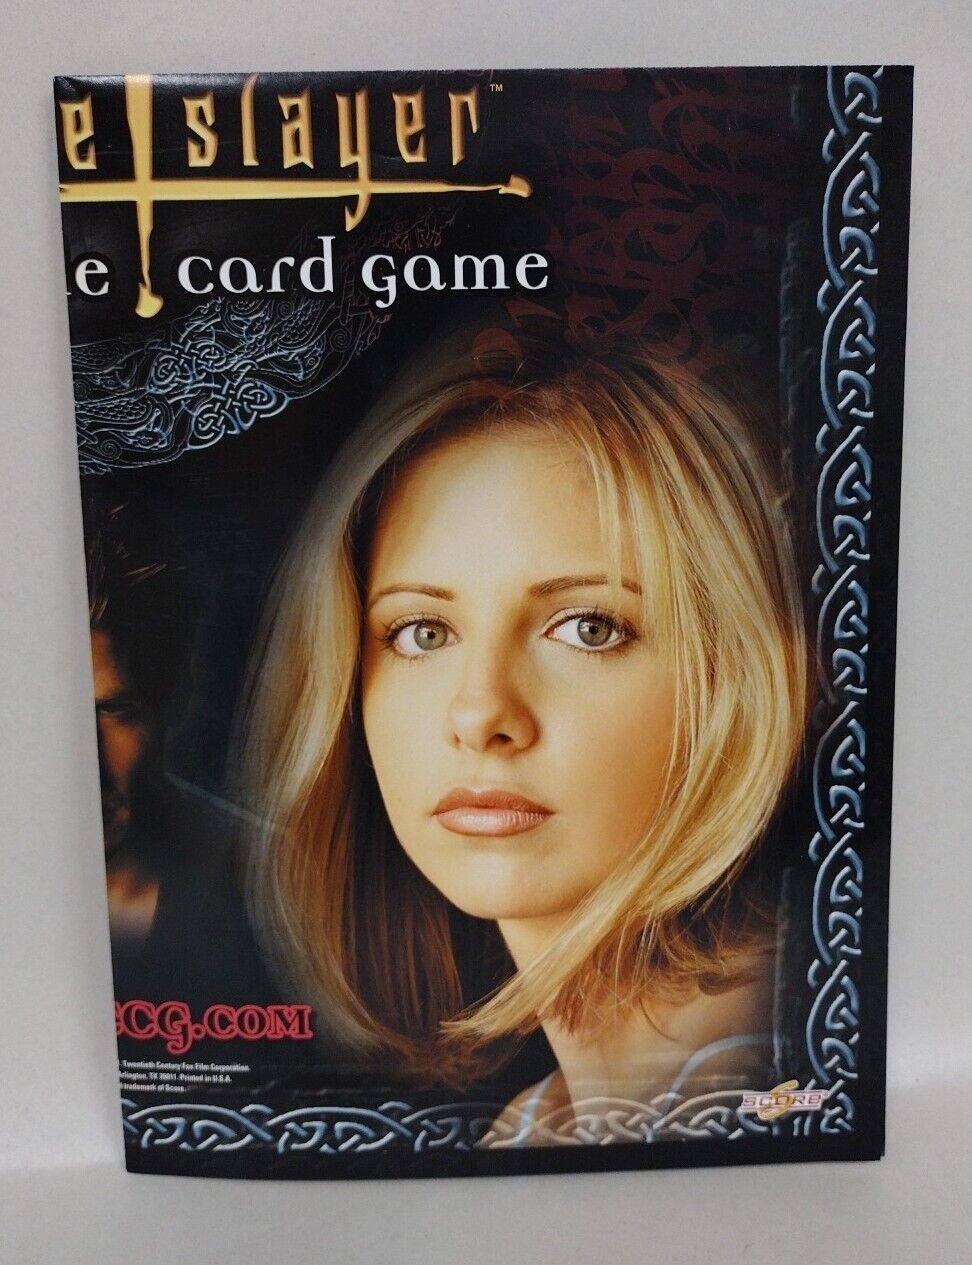 BUFFY THE VAMPIRE SLAYER (2001) Score Card Game Promo Poster 16 X 22" Folded 